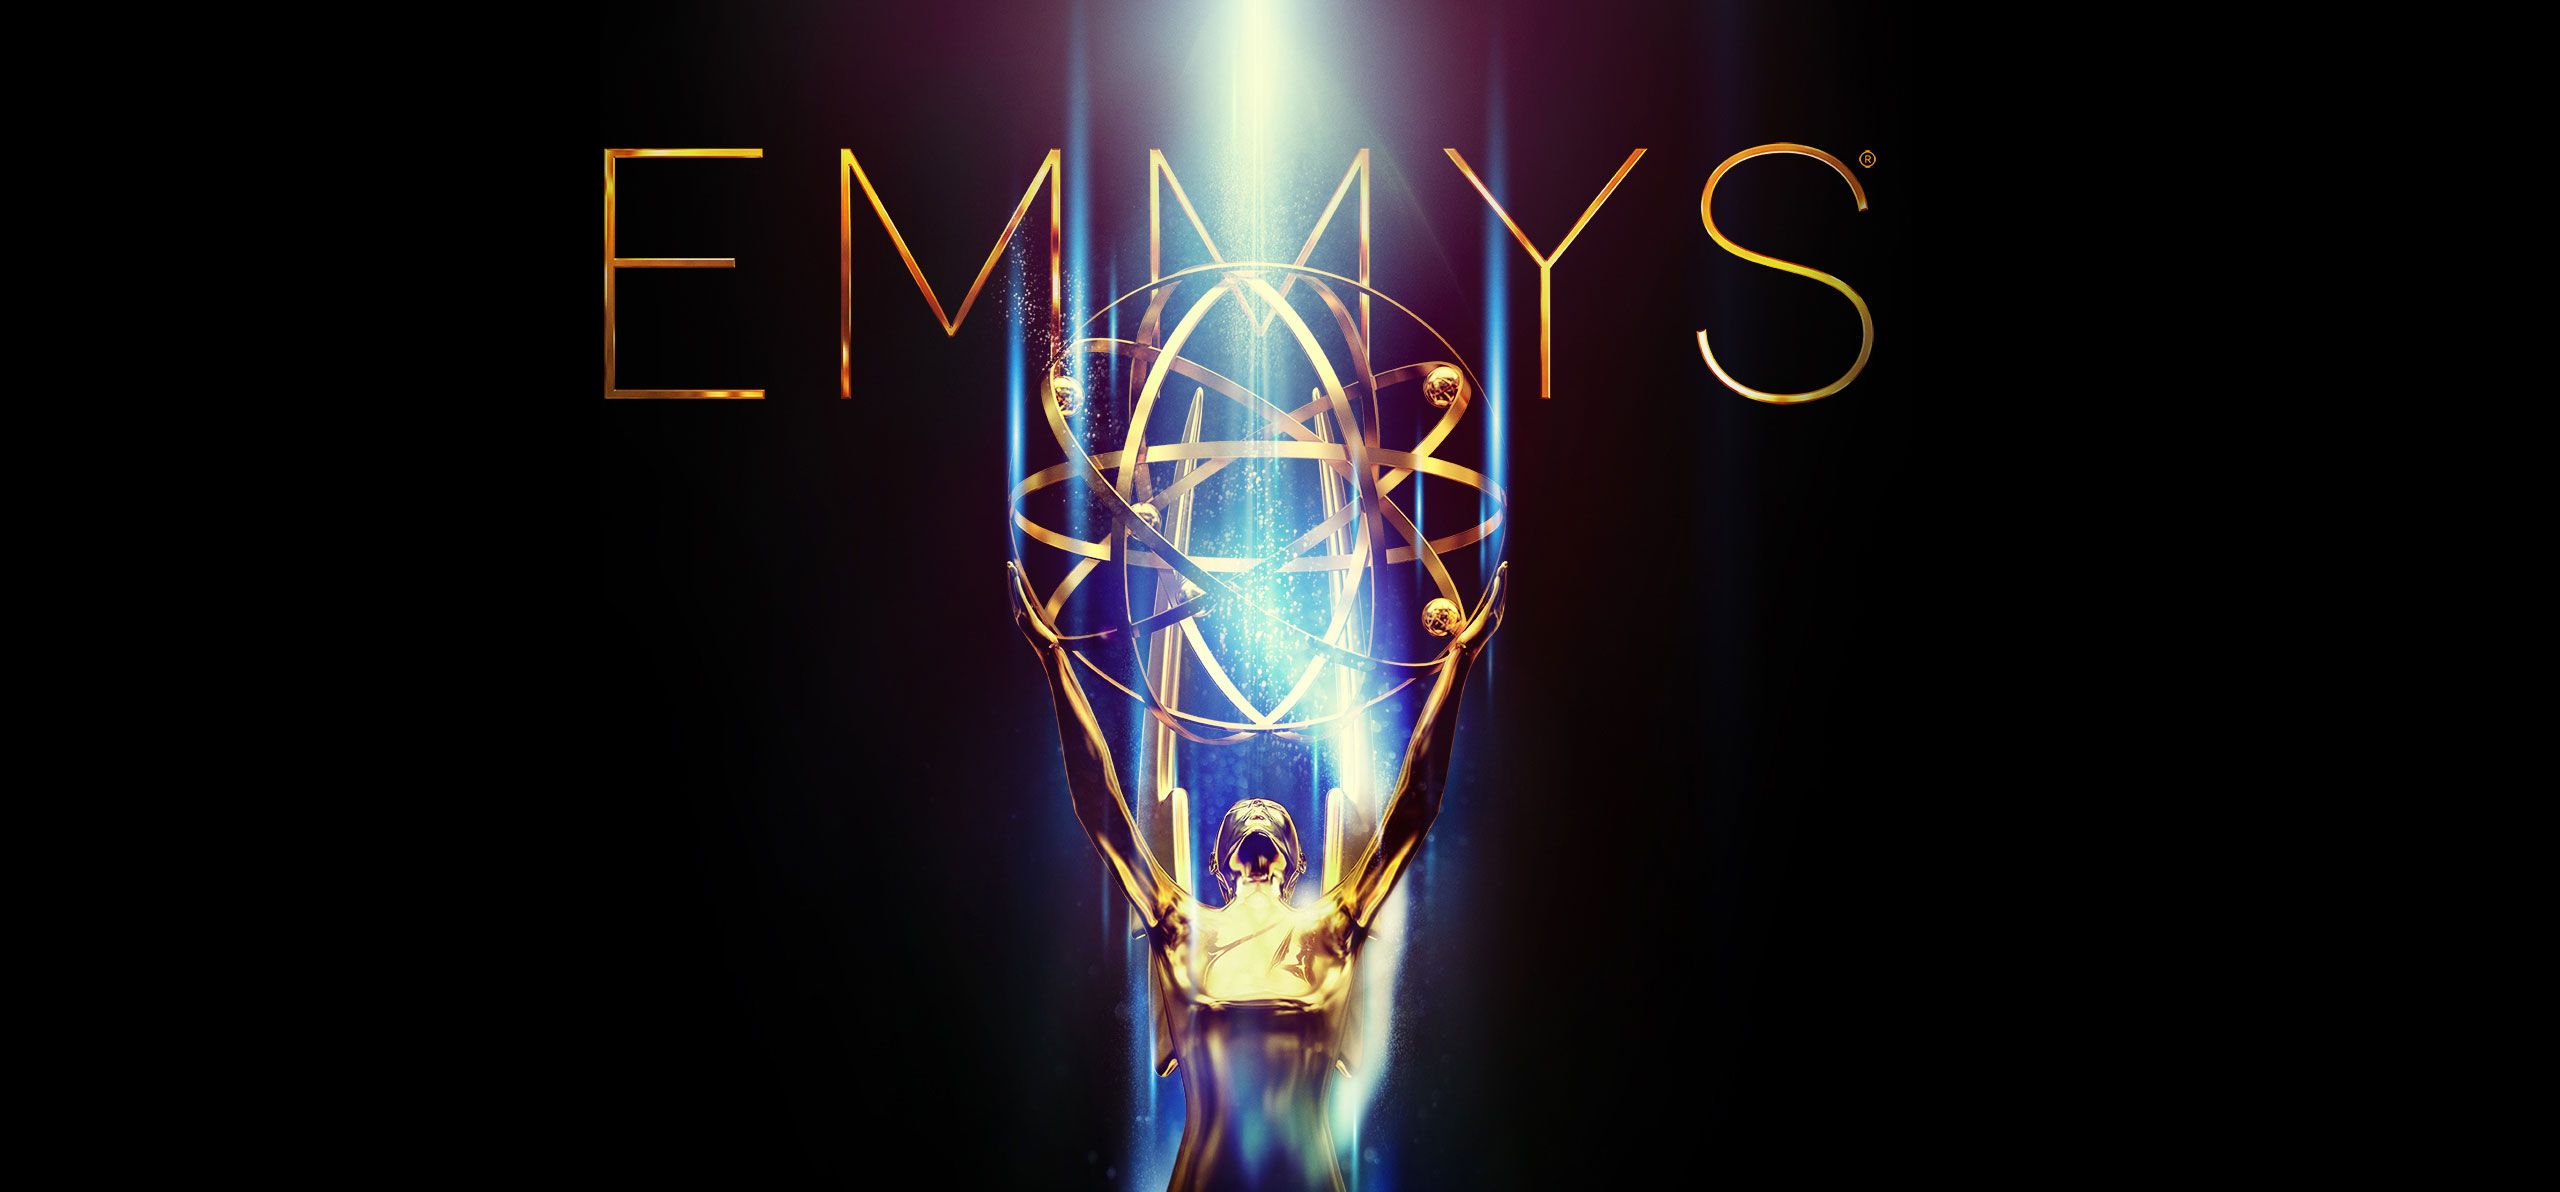 Full List of Nominations for the 66th Emmy Awards